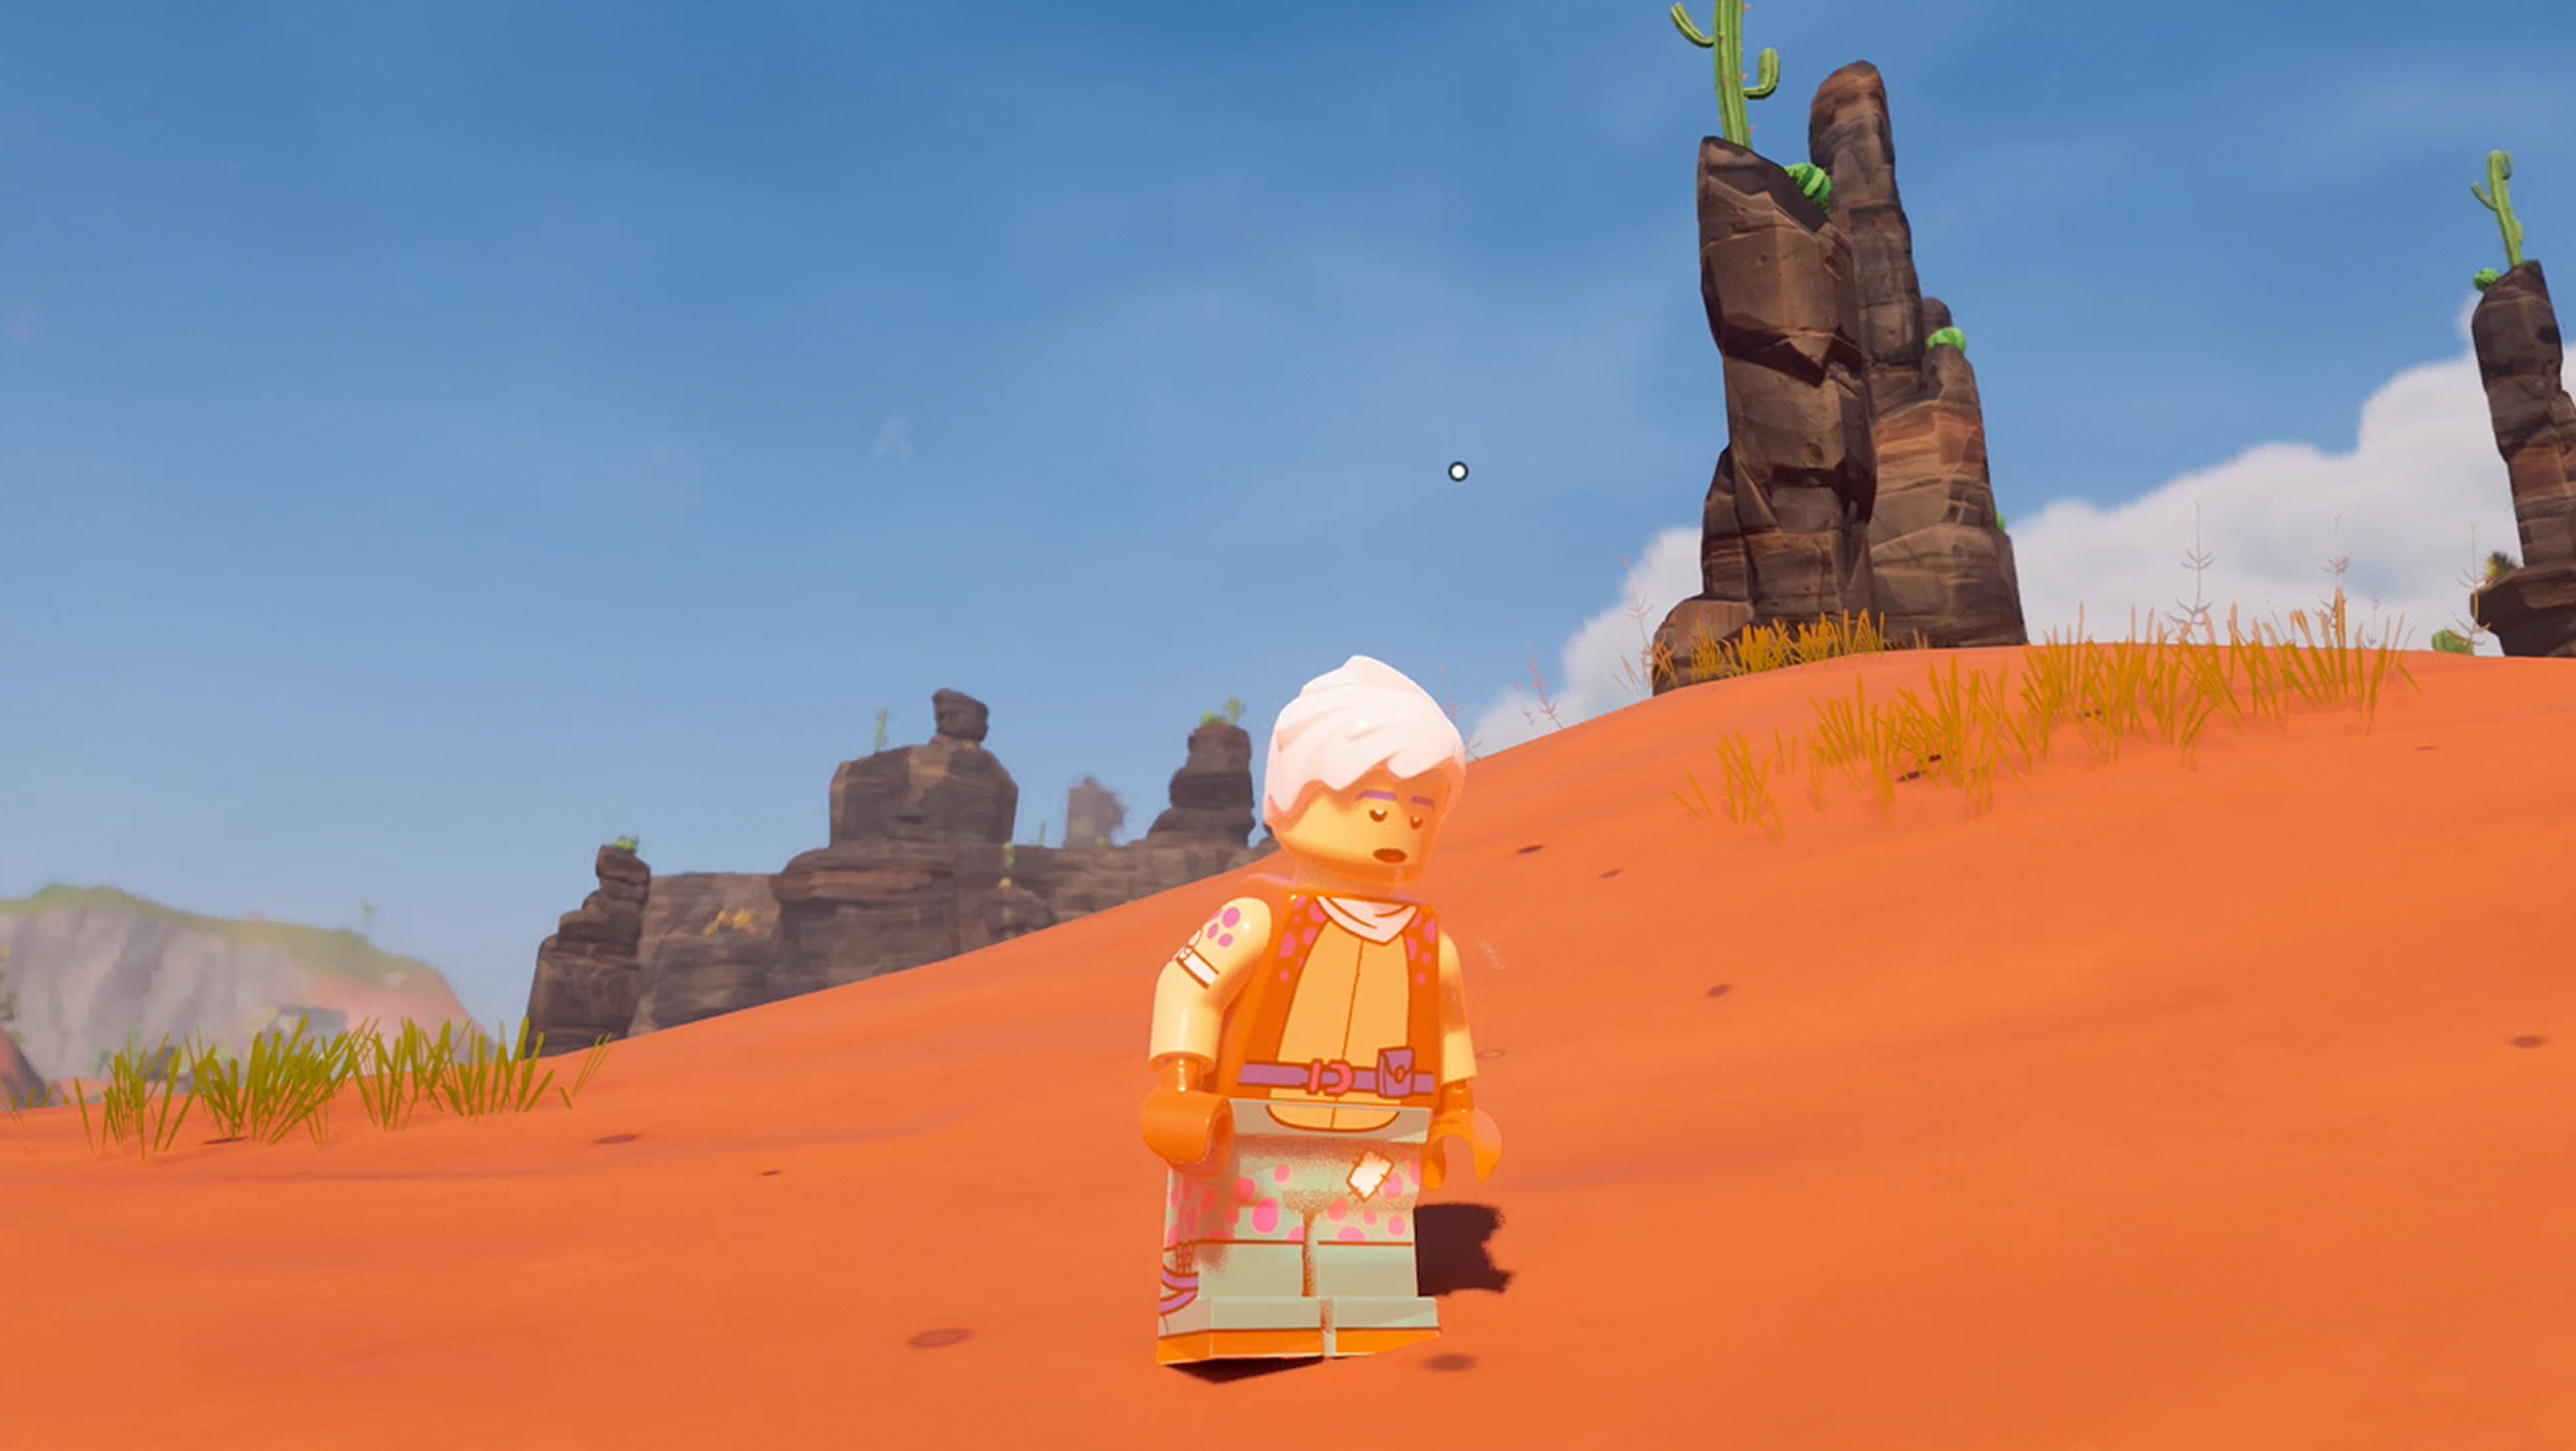 Lego Fortnite character sweating in the Dry Valley biome